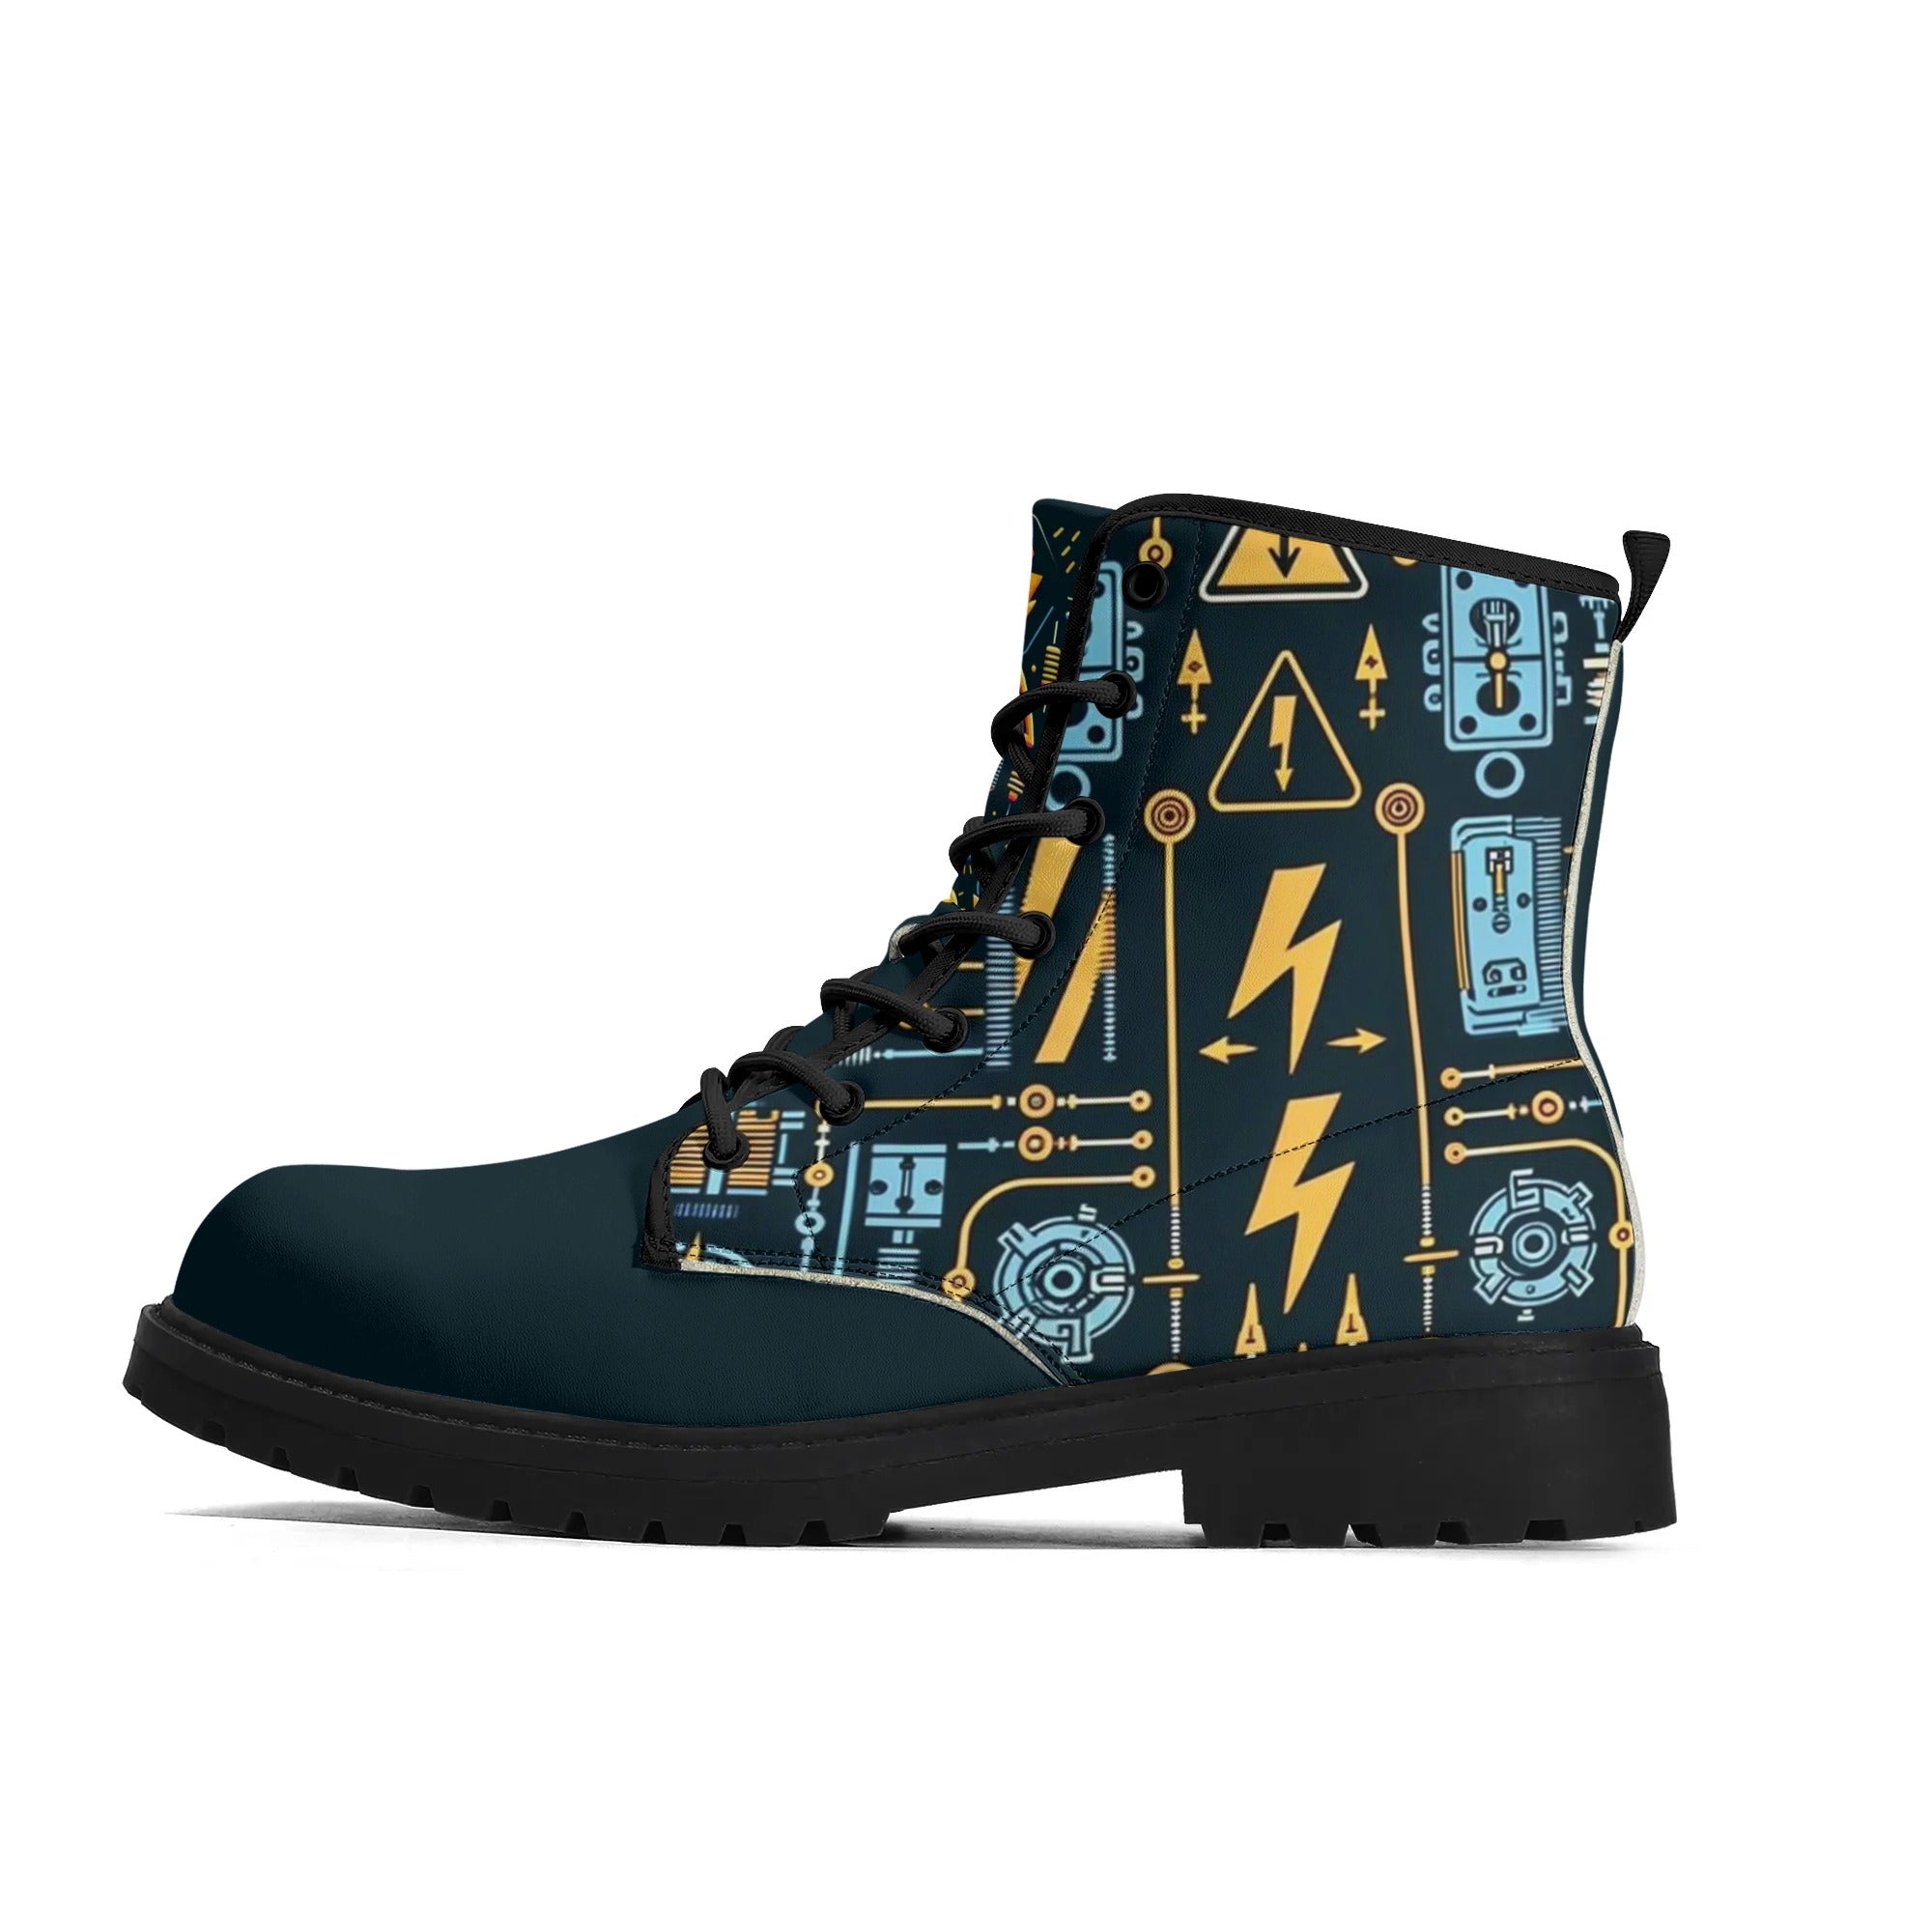 Custom Printed Eco-Friendly Shoes for All Seasons - Durable & Waterproof - Electricians Upgraded Black Outsole Leather Boots